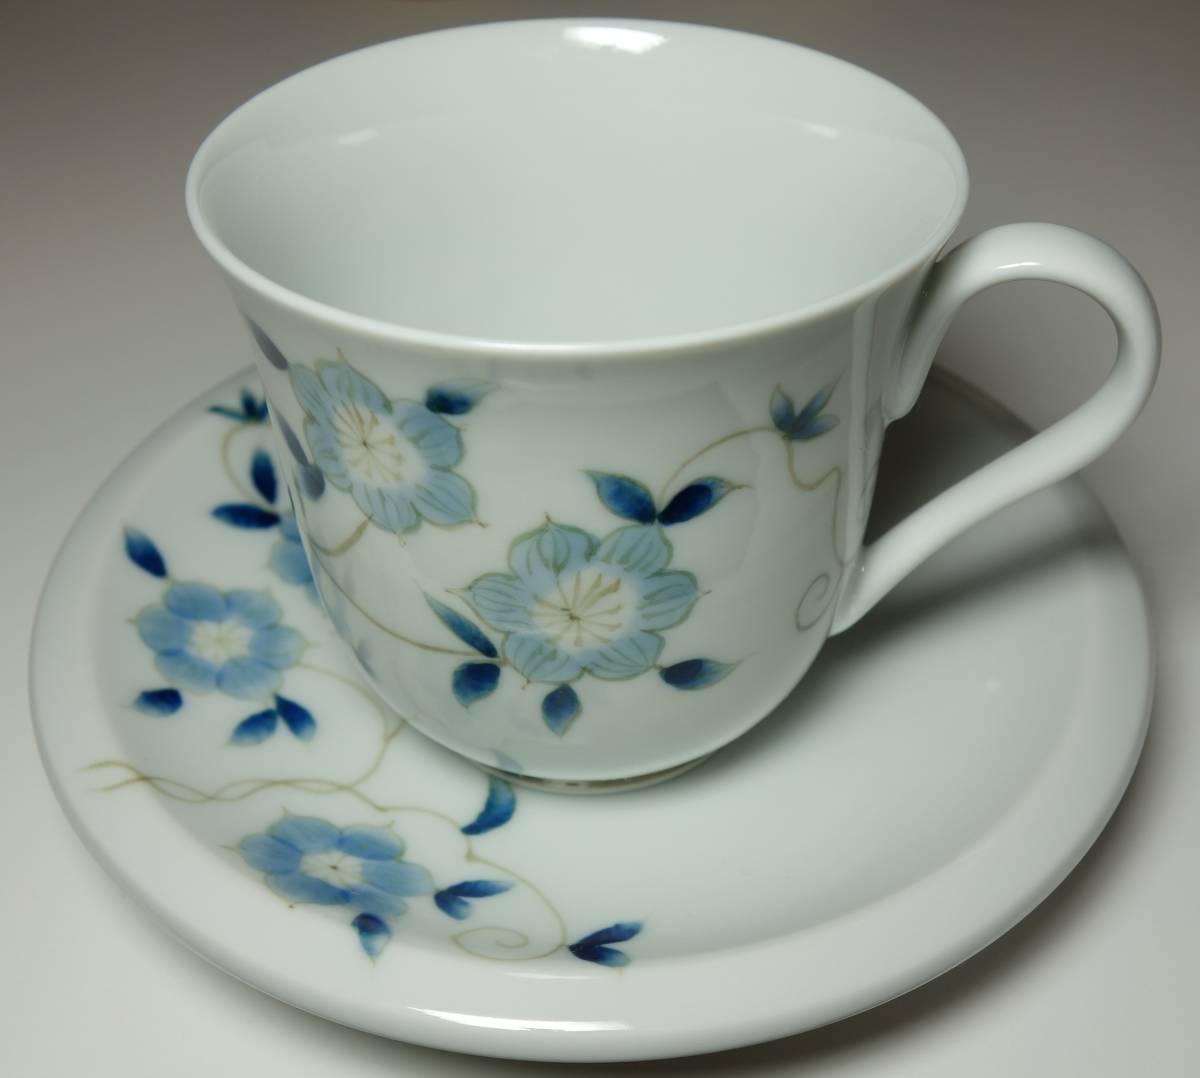 Heisei Period Romance Hand-painted Flower Illustration Coffee Cup & Saucer Rare Hand, japanese ceramics, Ceramics in general, colored porcelain